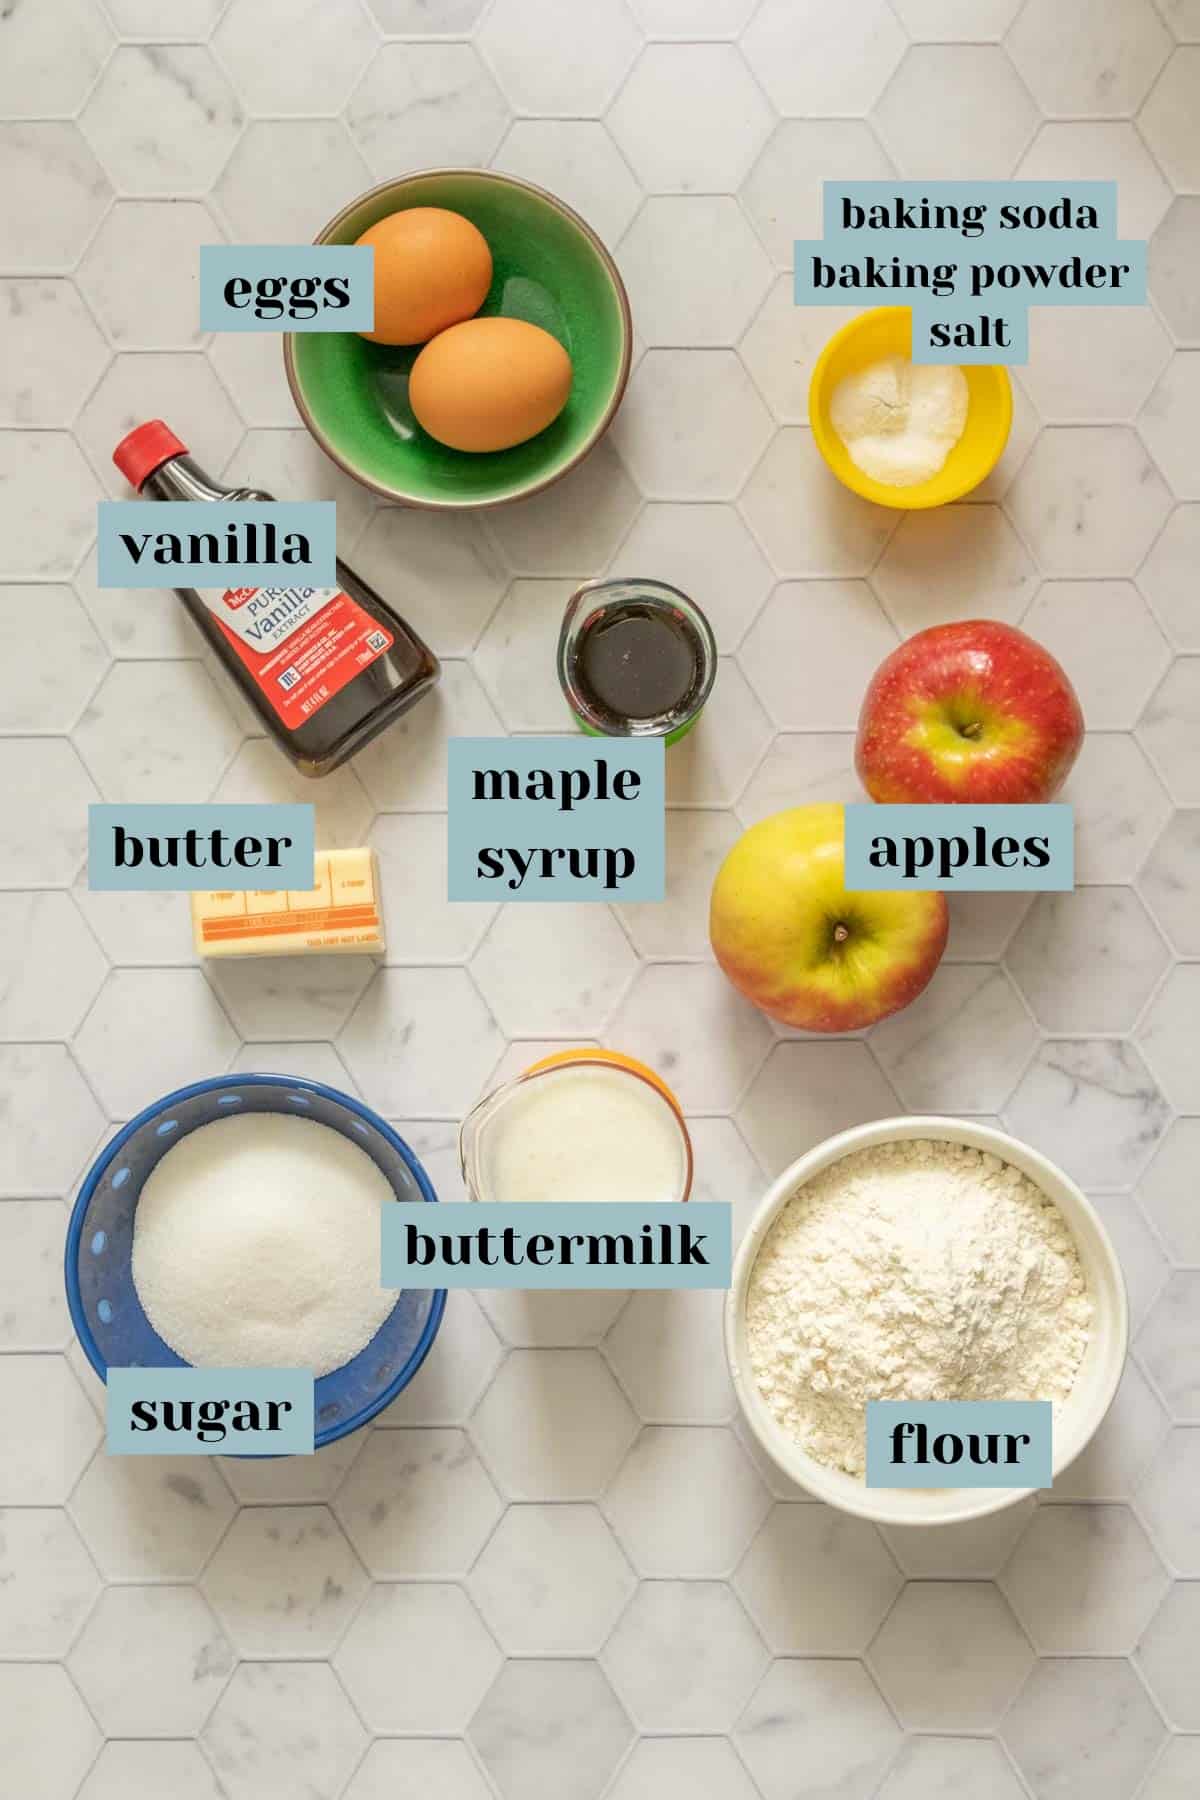 Ingredients for apple muffins on a tile surface with labels.